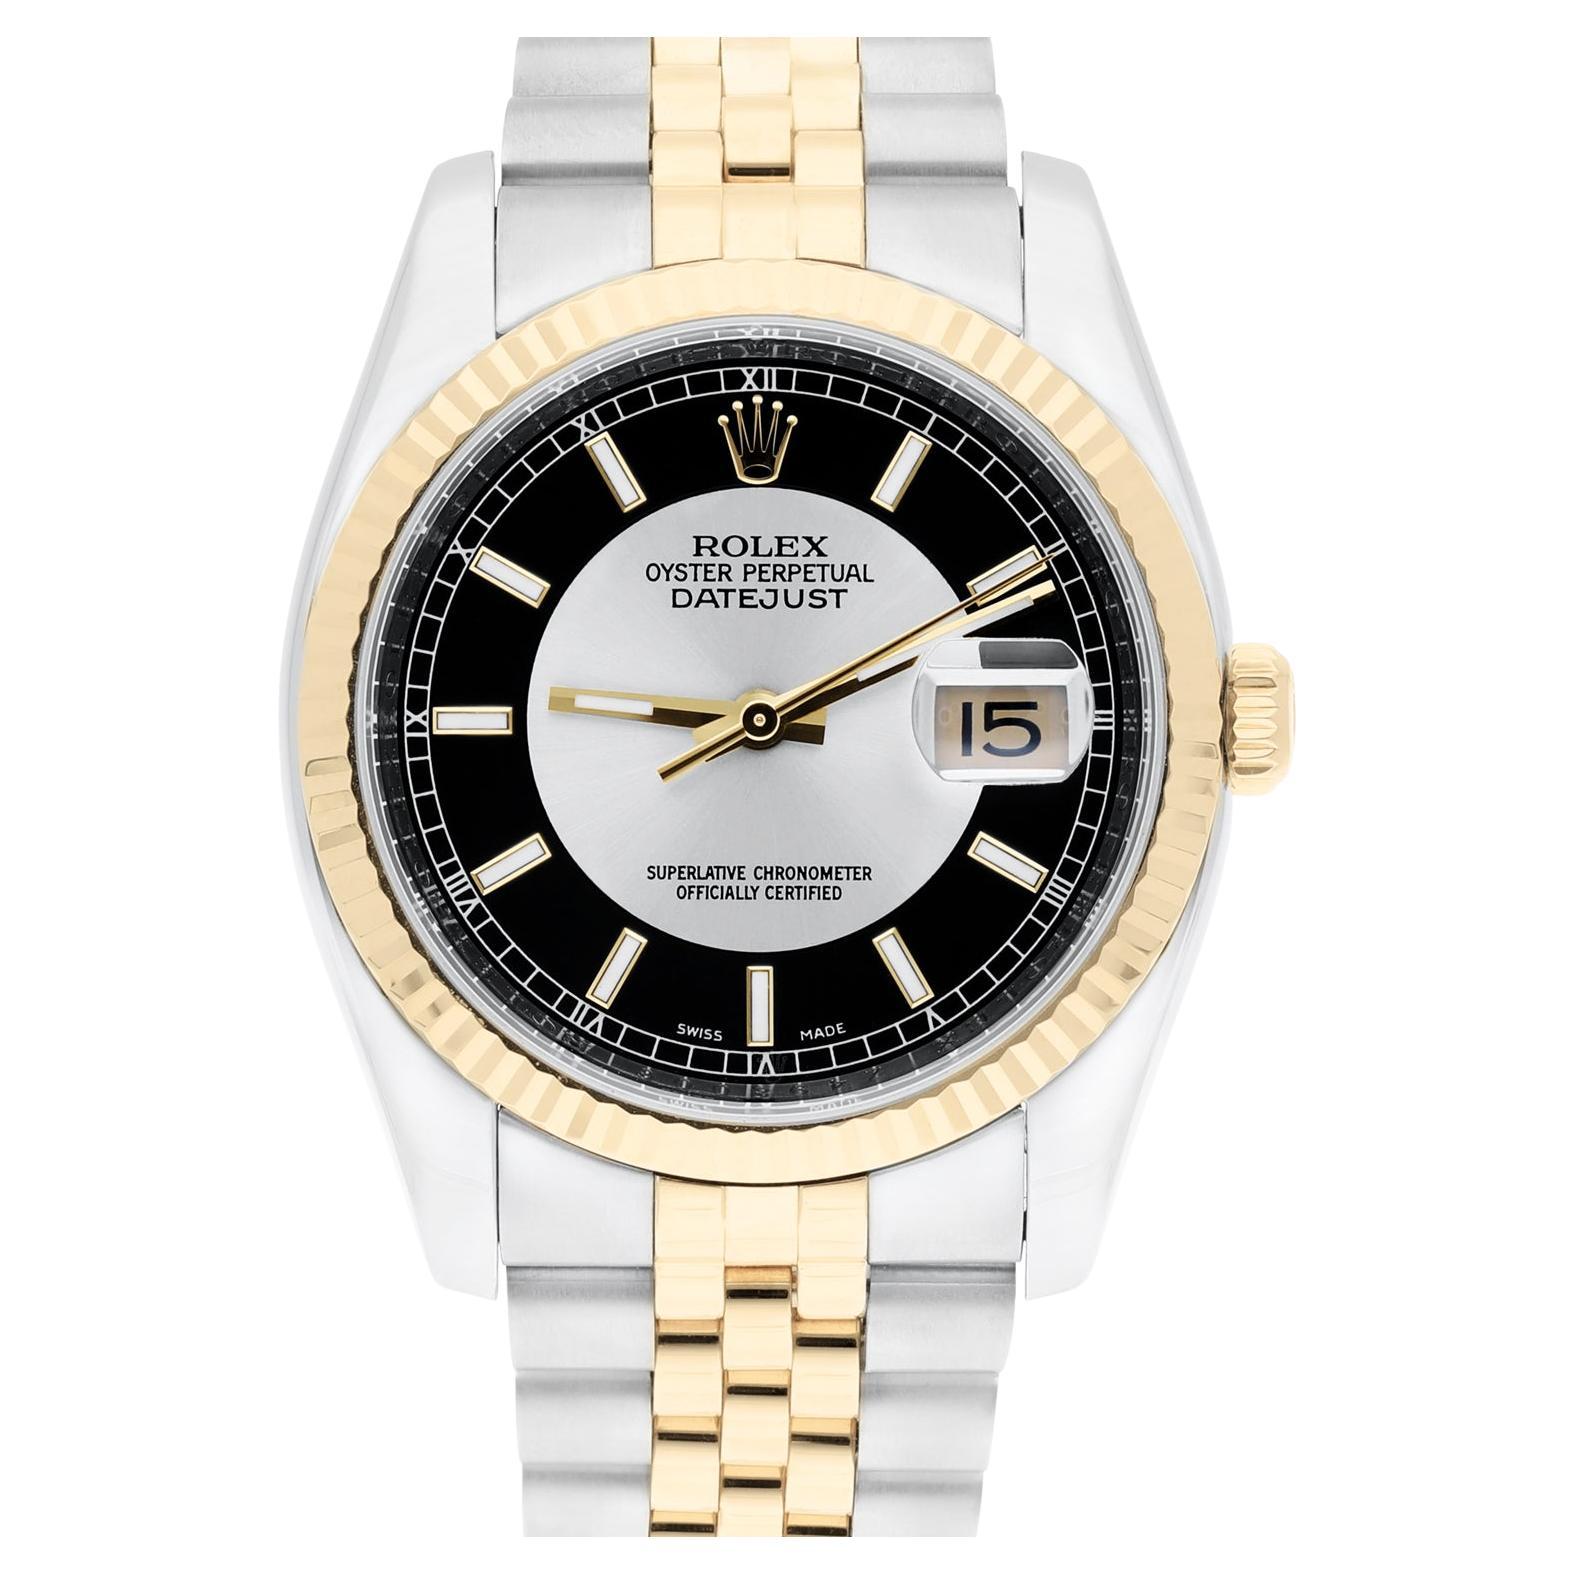 Rolex Datejust 36 Jubilee 116233 Stainless Steel & Yellow Gold Watch Tuxedo Dial For Sale